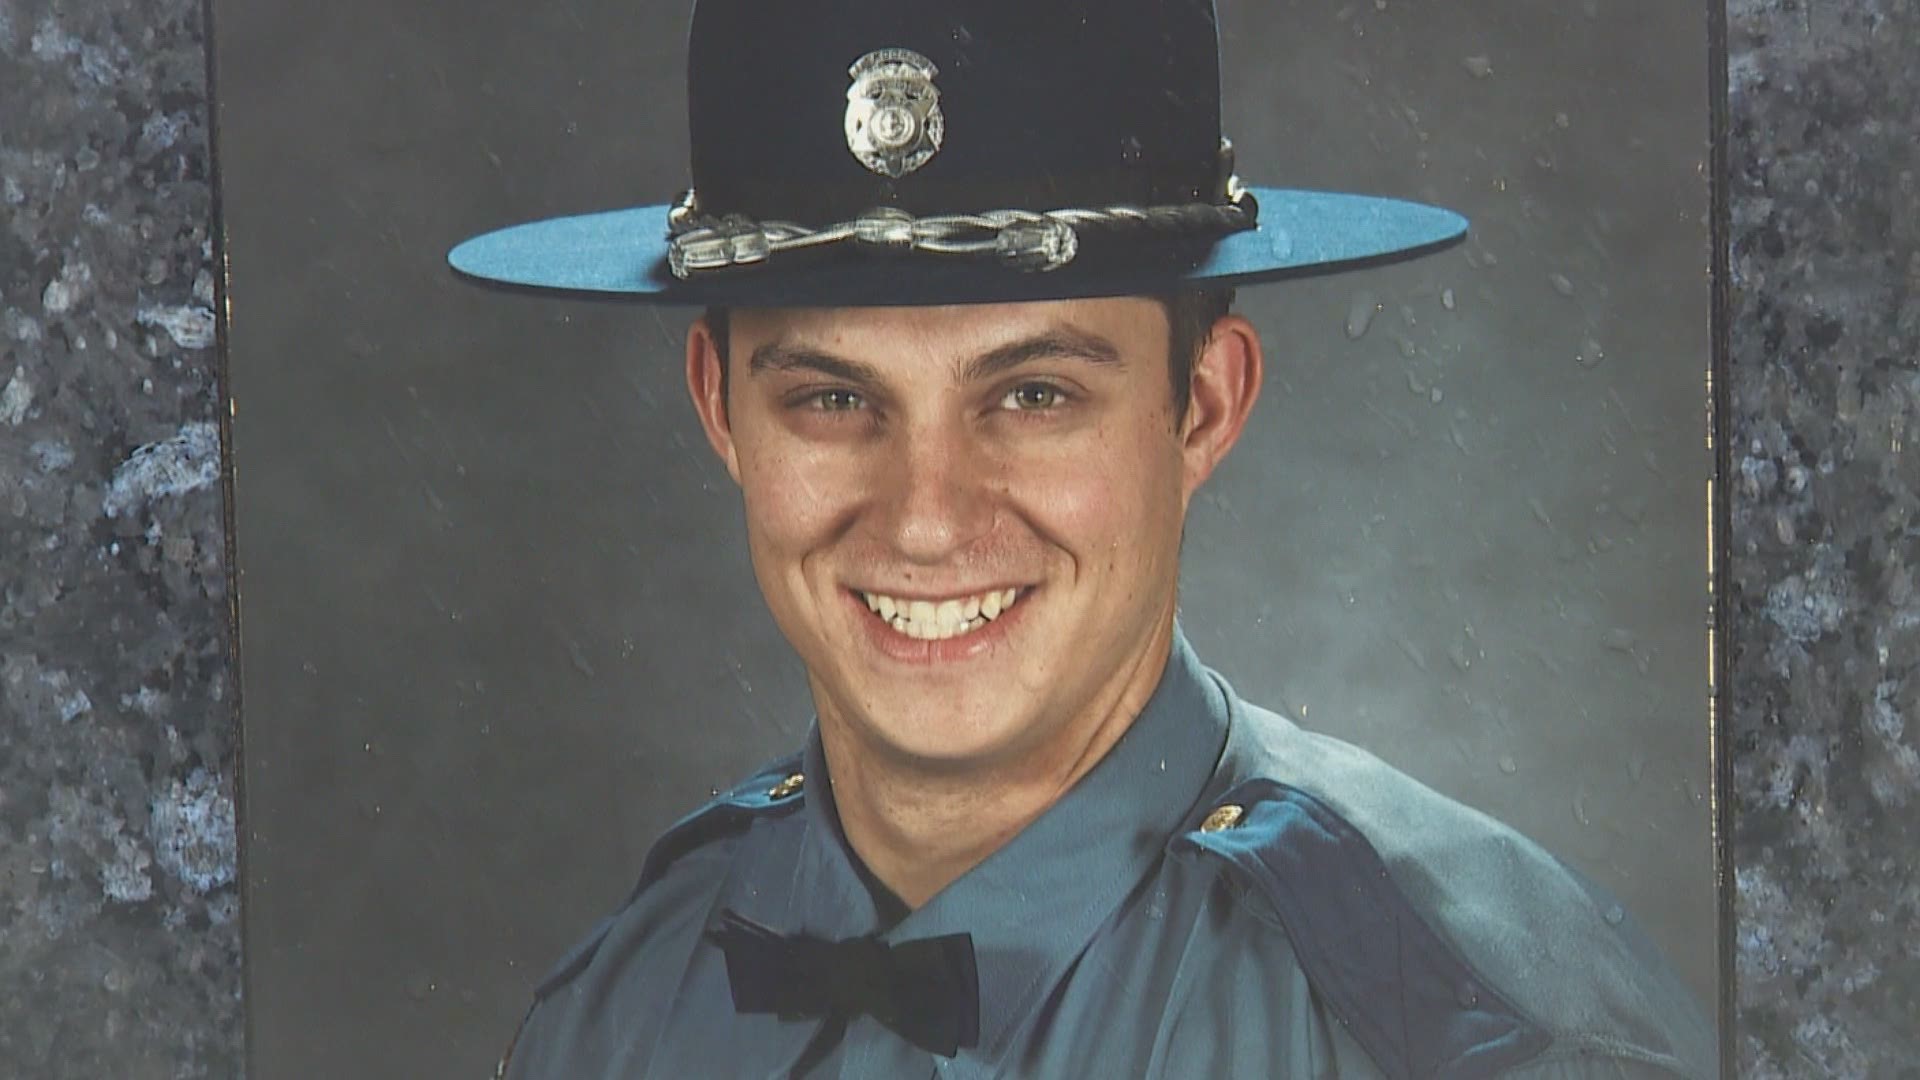 The suspect who struck and killed Washington State Patrol Trooper Justin Schaffer one year ago is accused of hitting him on purpose.